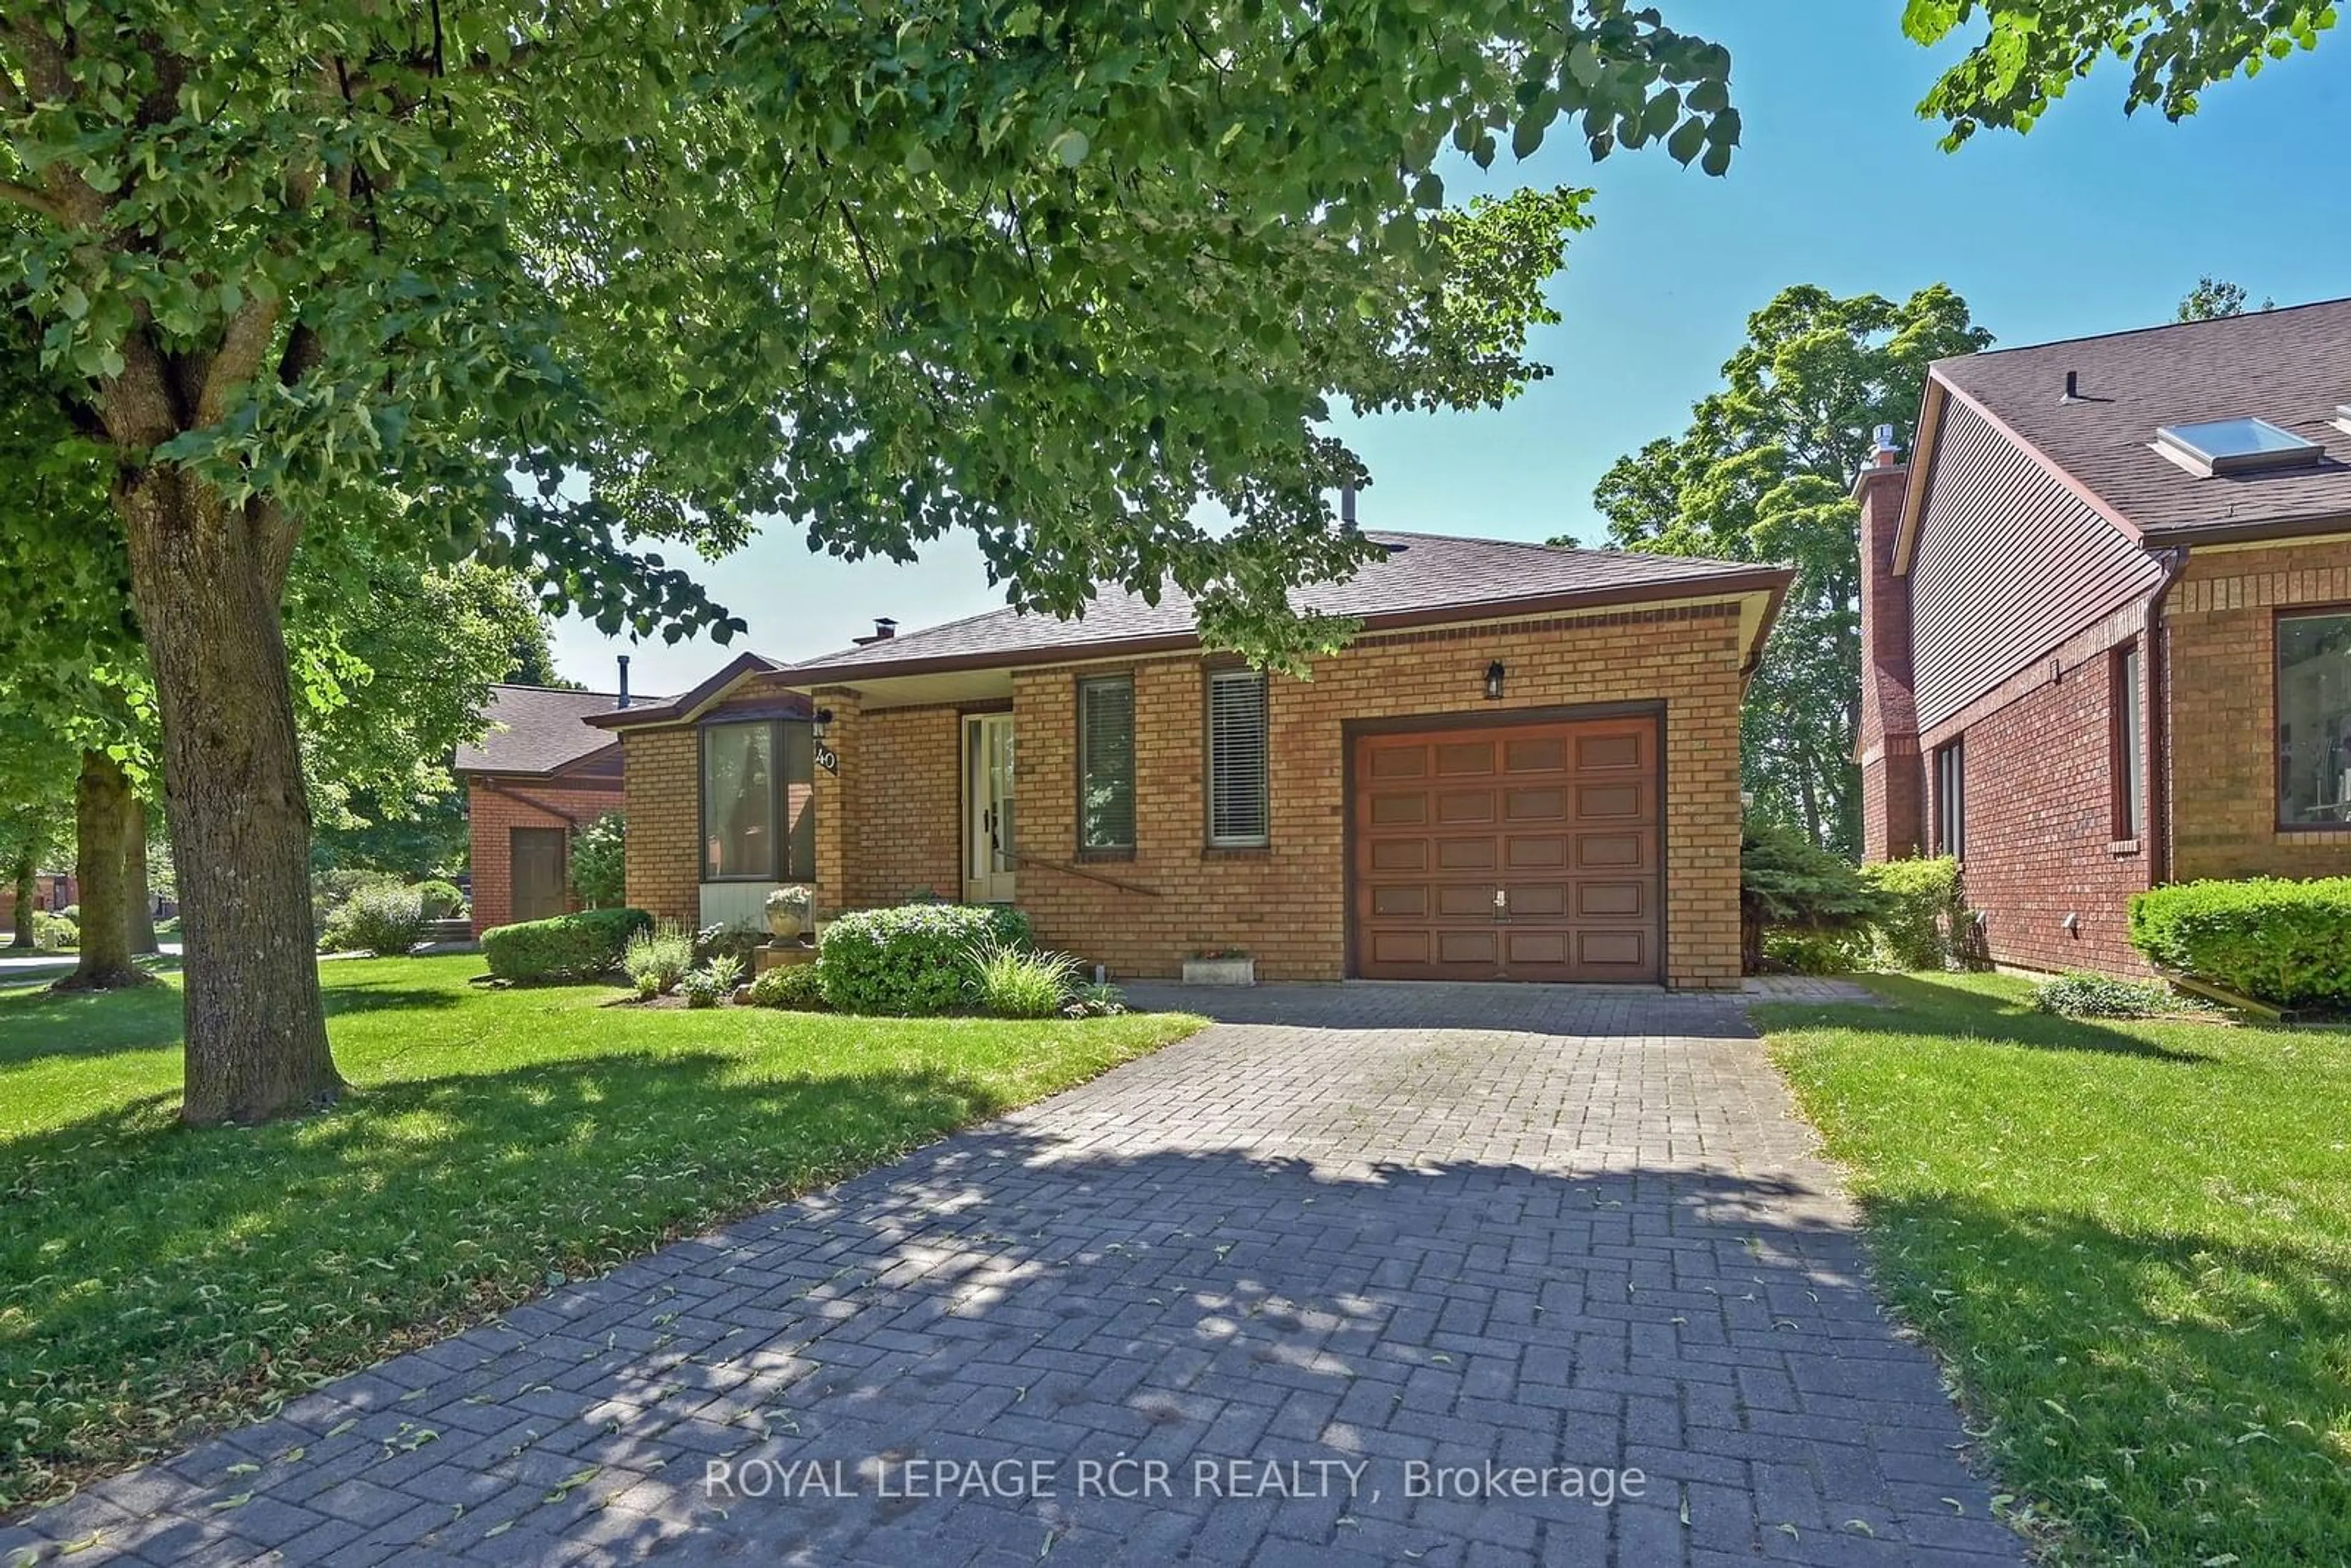 Home with brick exterior material for 40 Riverview Rd, New Tecumseth Ontario L9R 1R8